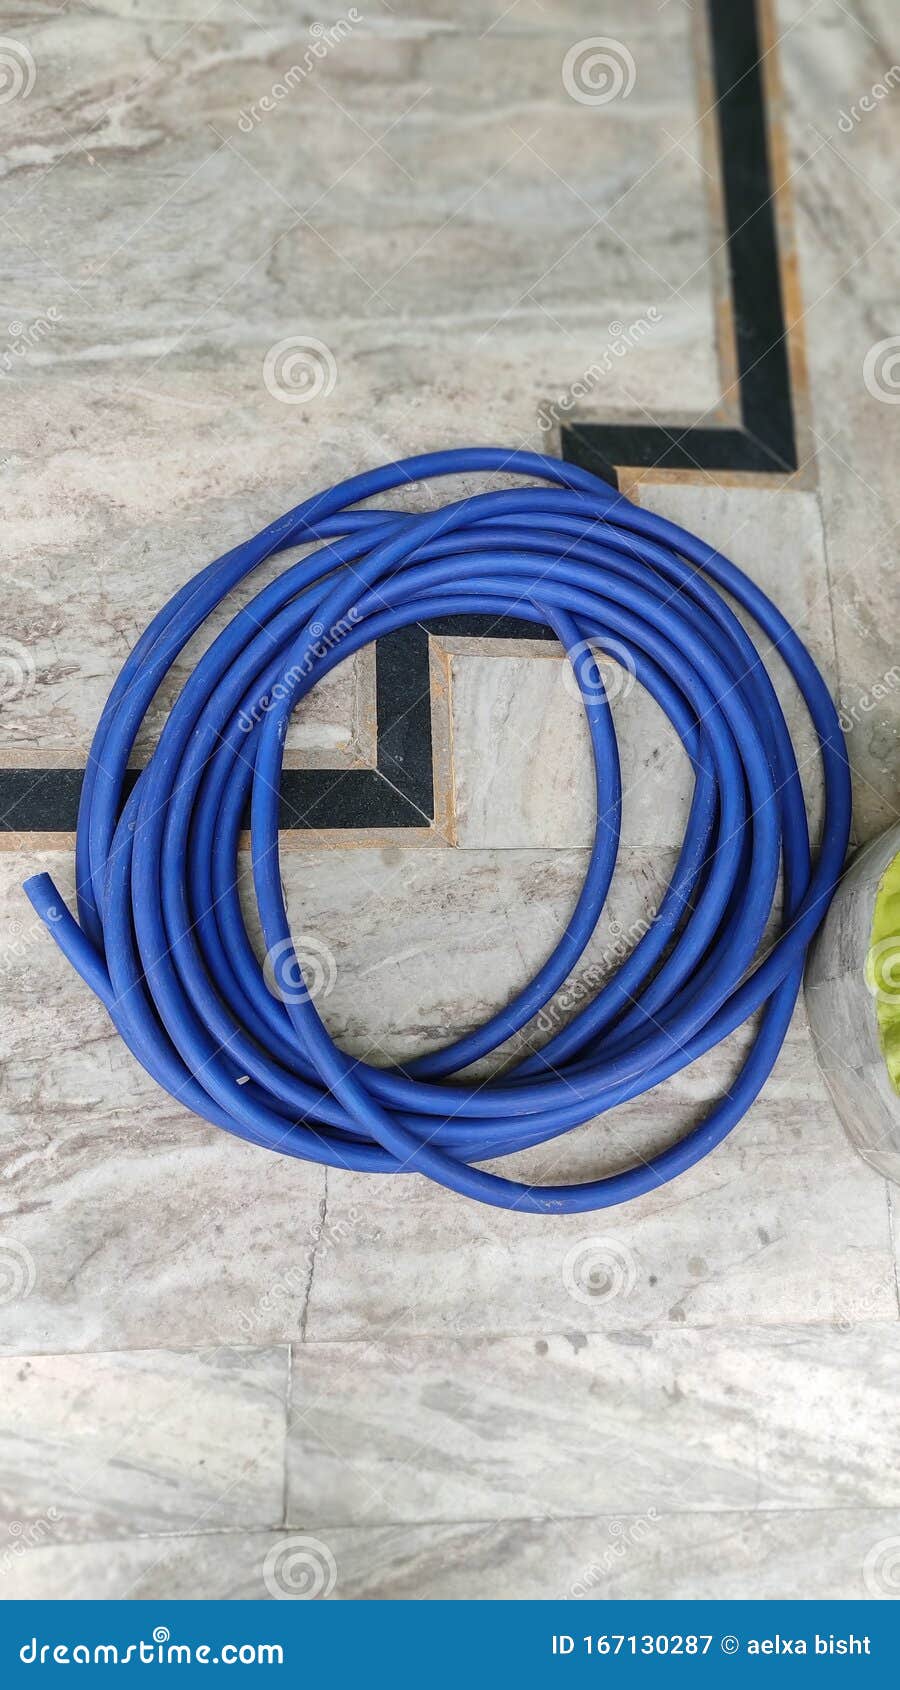 rubber pipe water follow smoother